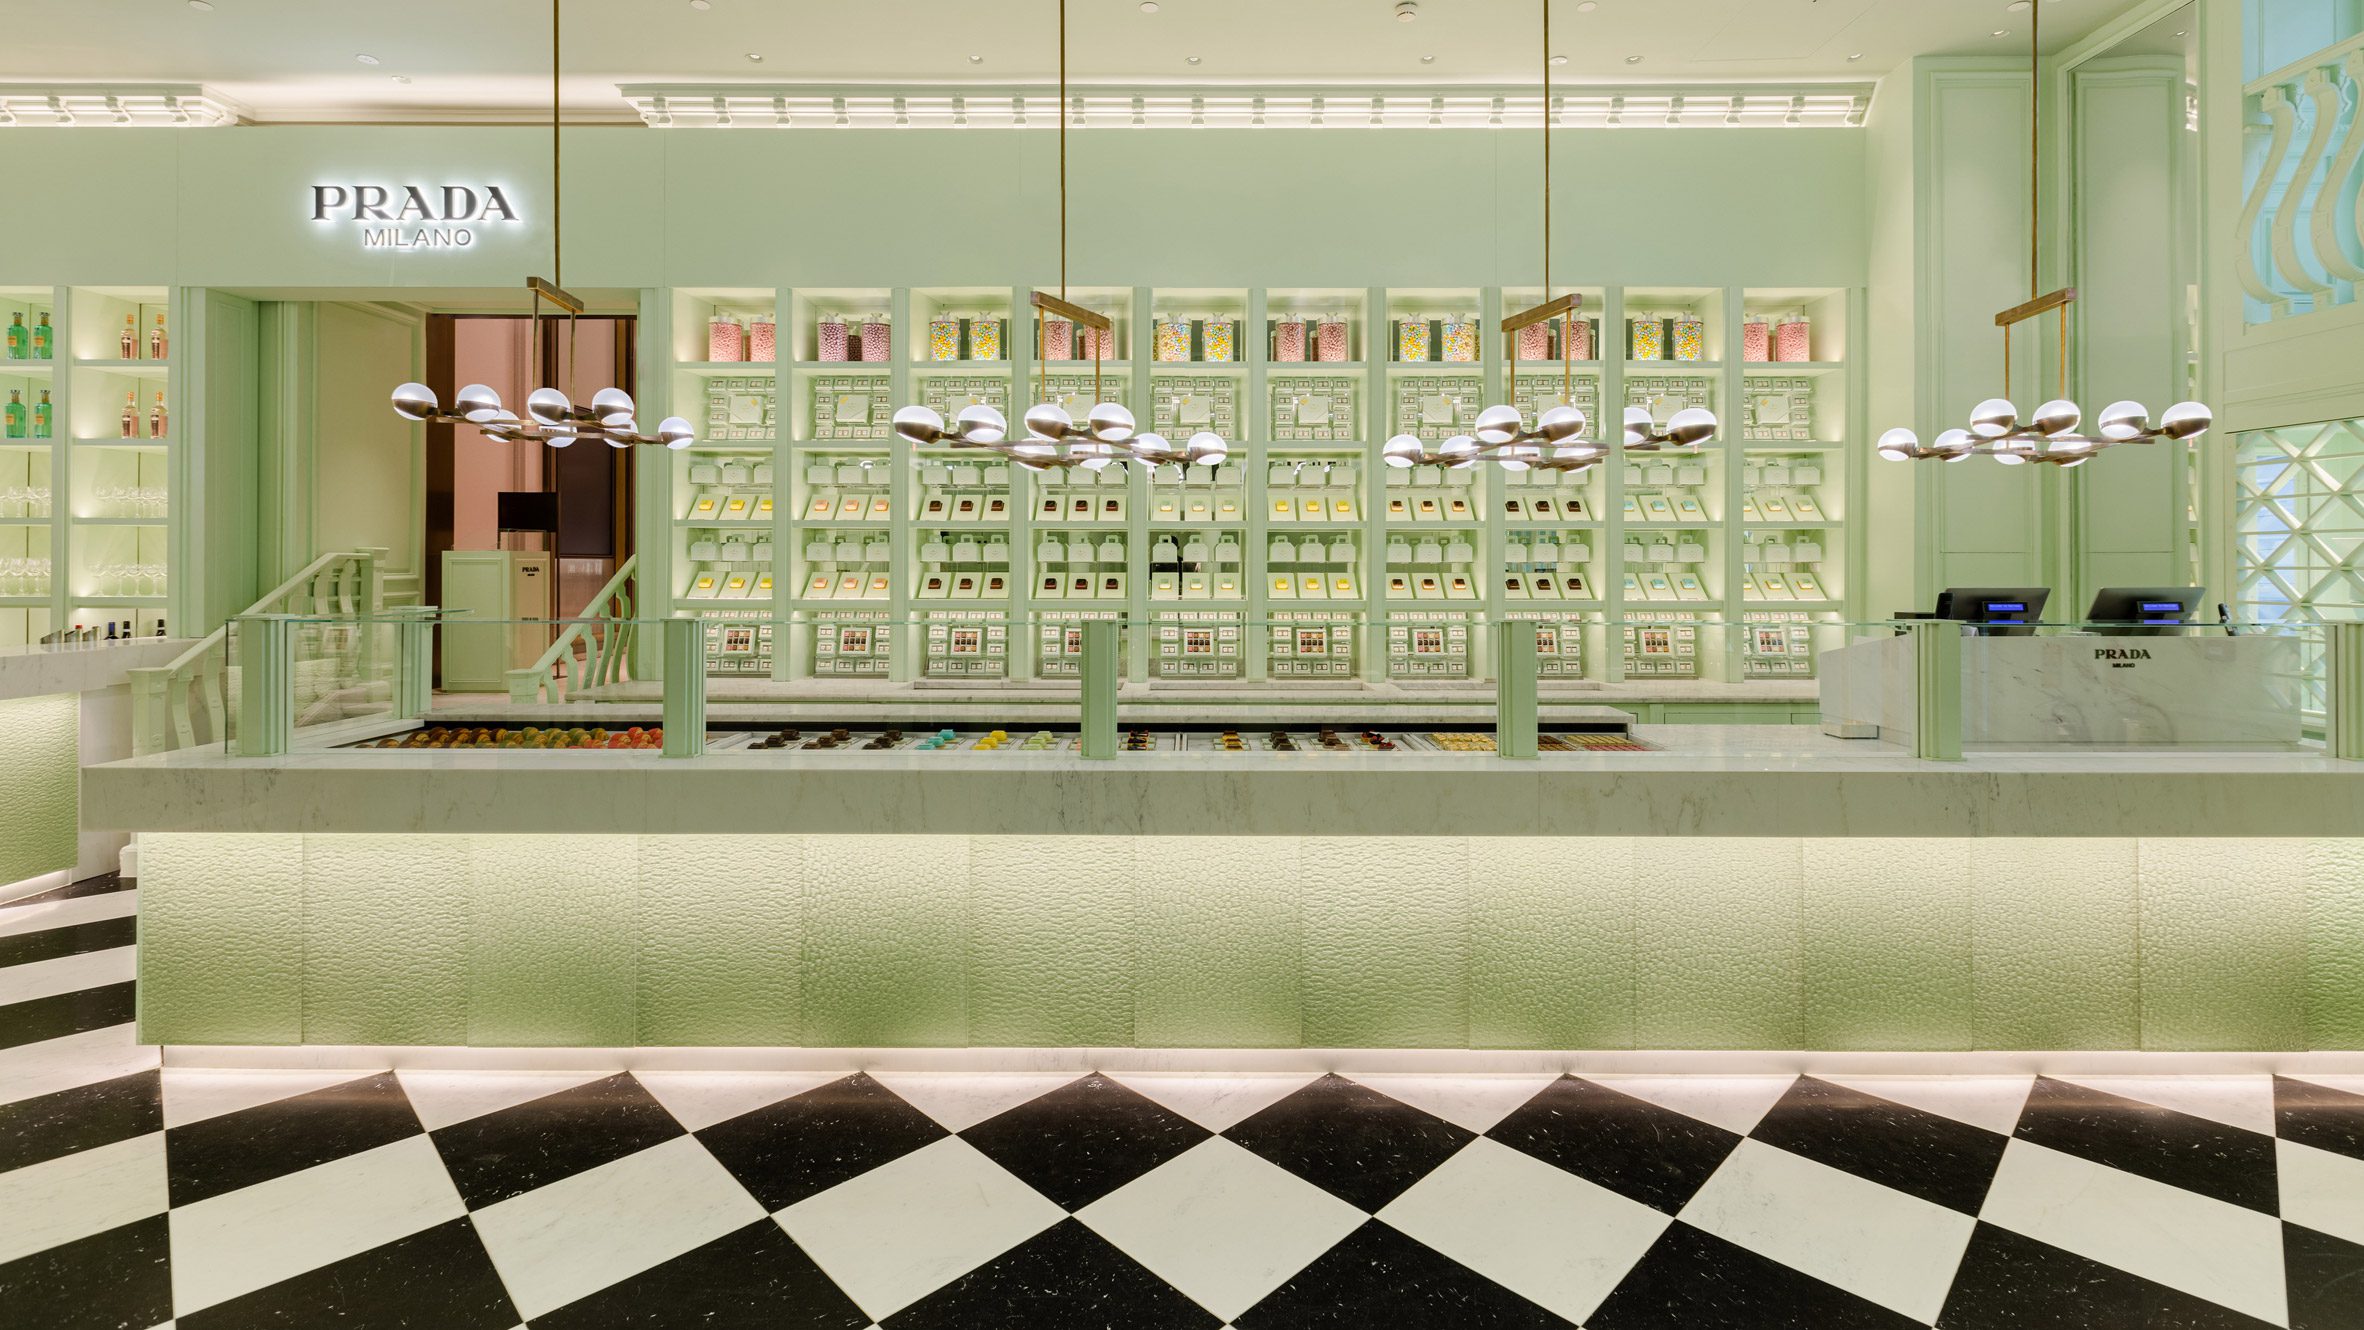 This week Prada opened a mint-green cafe at Harrods